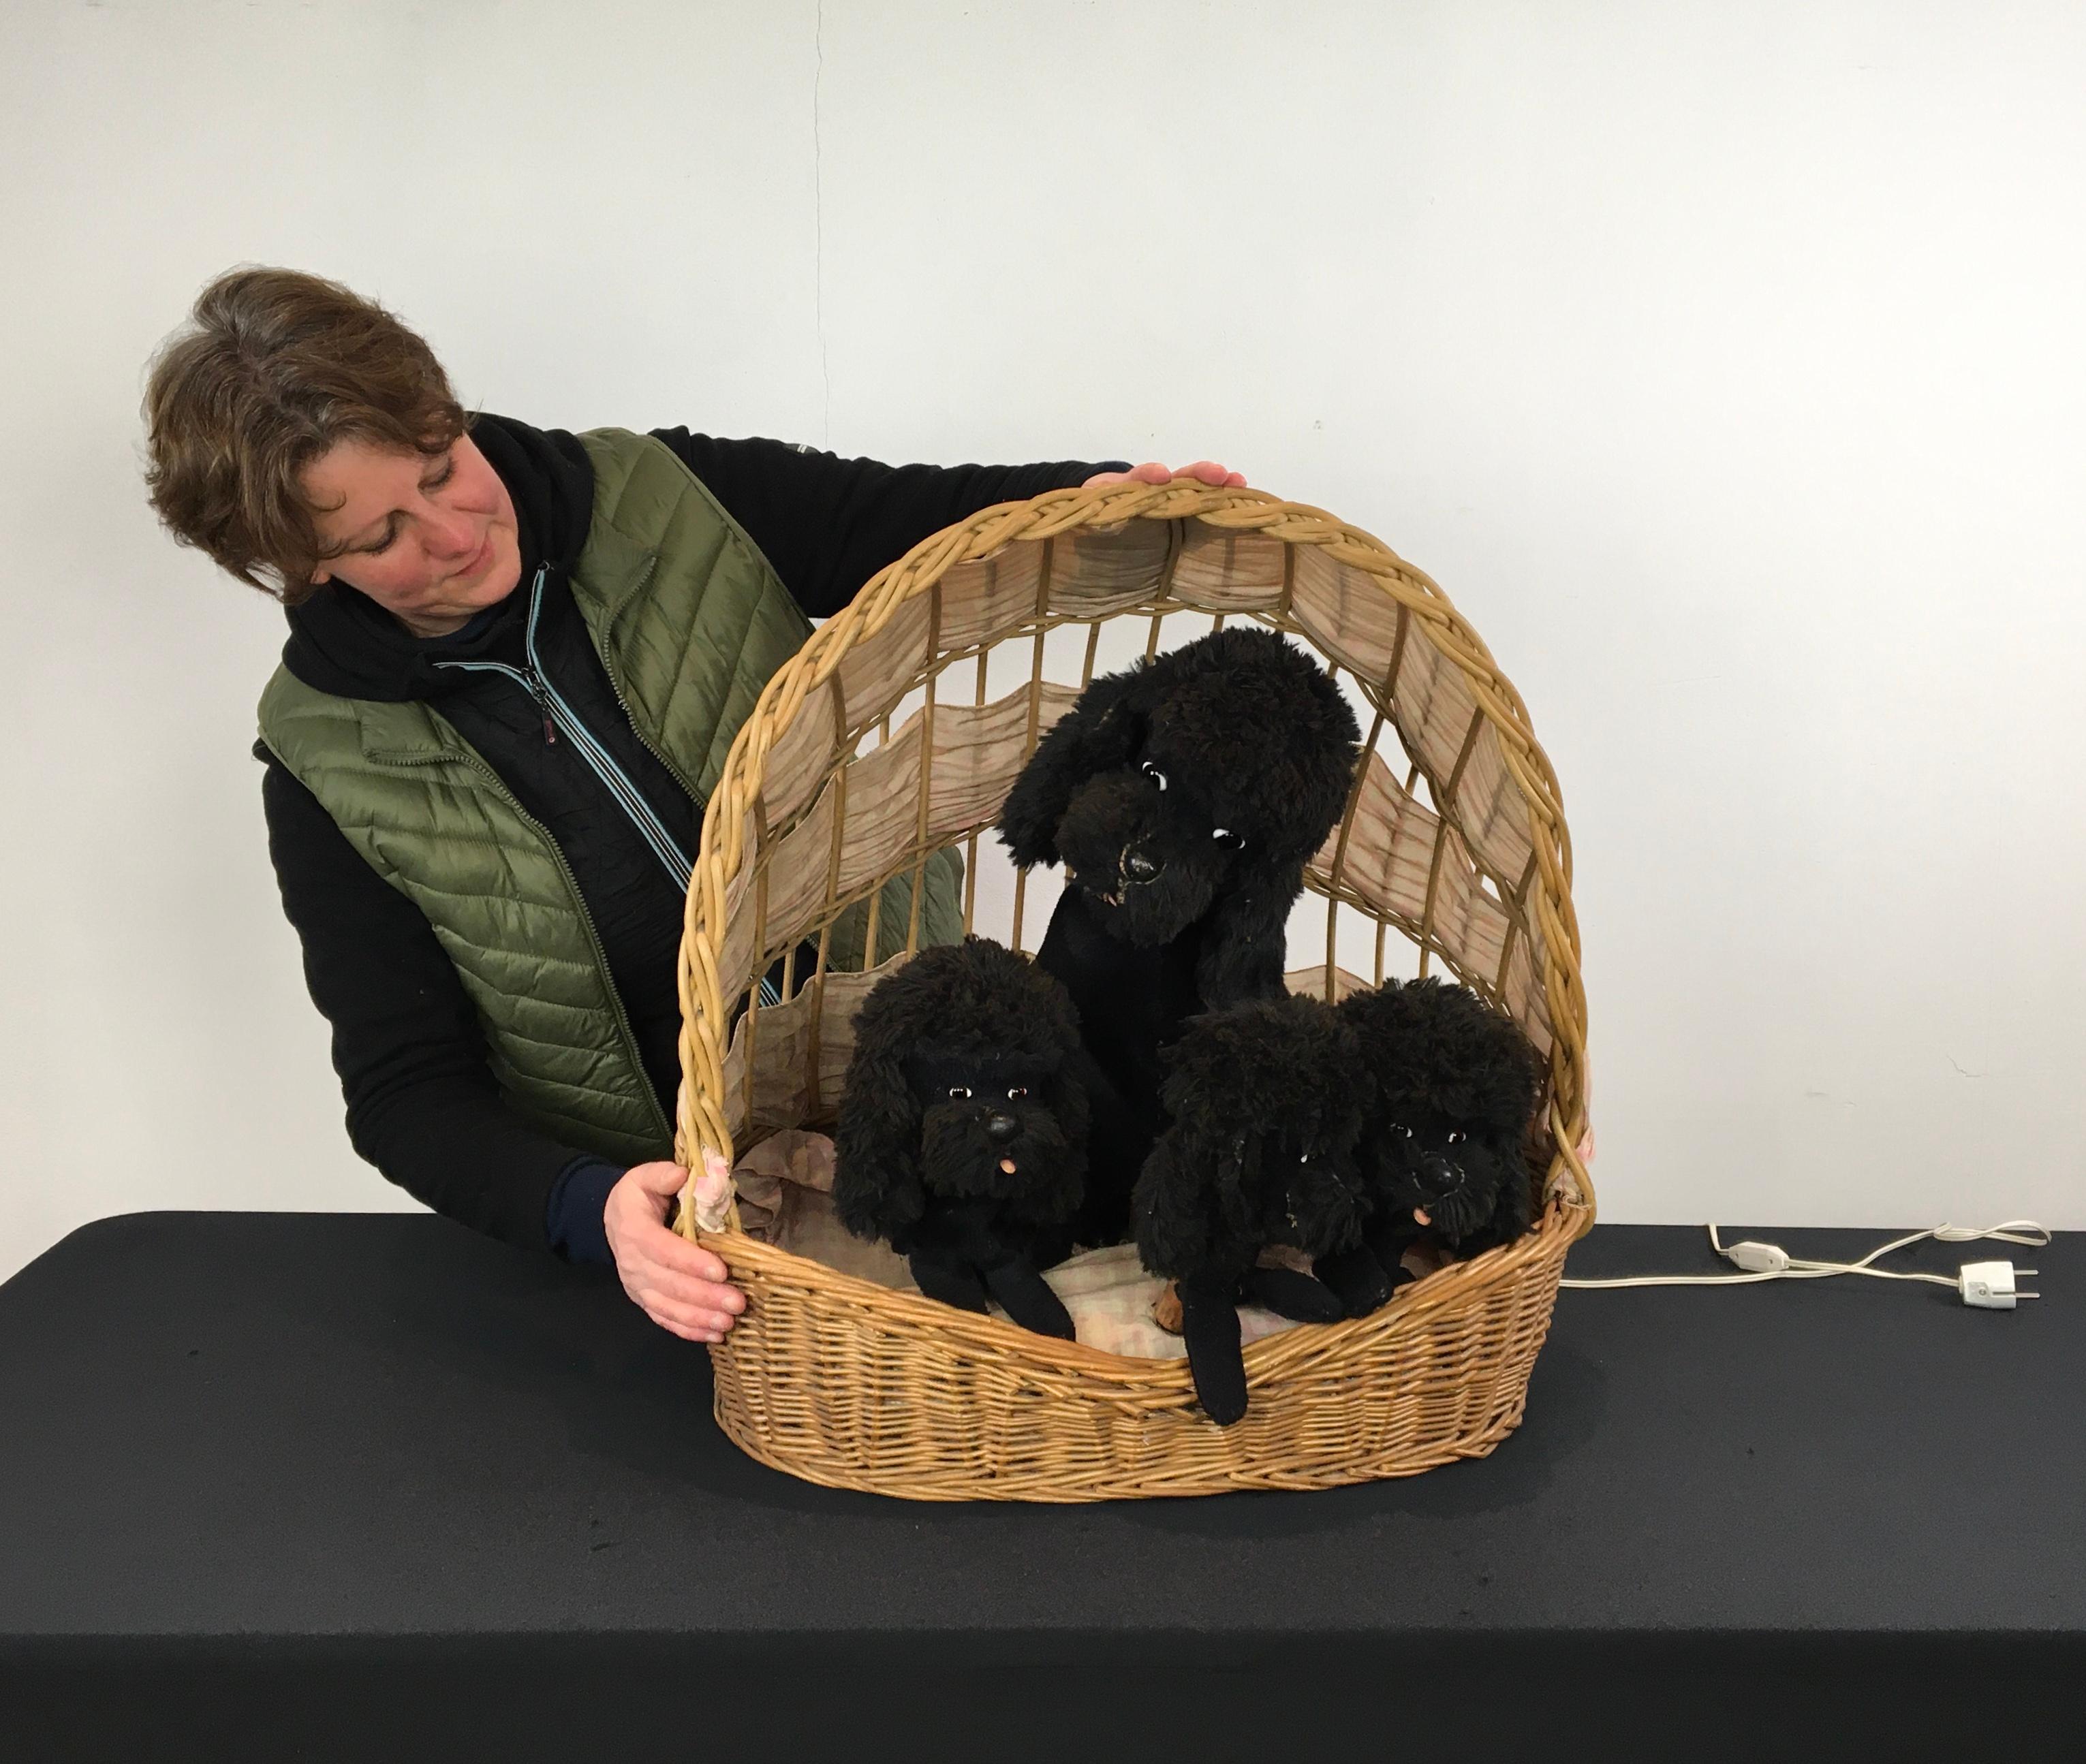 Automaton with dogs in a basket - poodles in rattan dog basket. 
A wicker basket filled with 4 black poodle dogs. 
A moving store display with 1 mama poodle and 3 puppies. 
The dogs are filled with straw, have mohair fur and glass eyes . 
They are